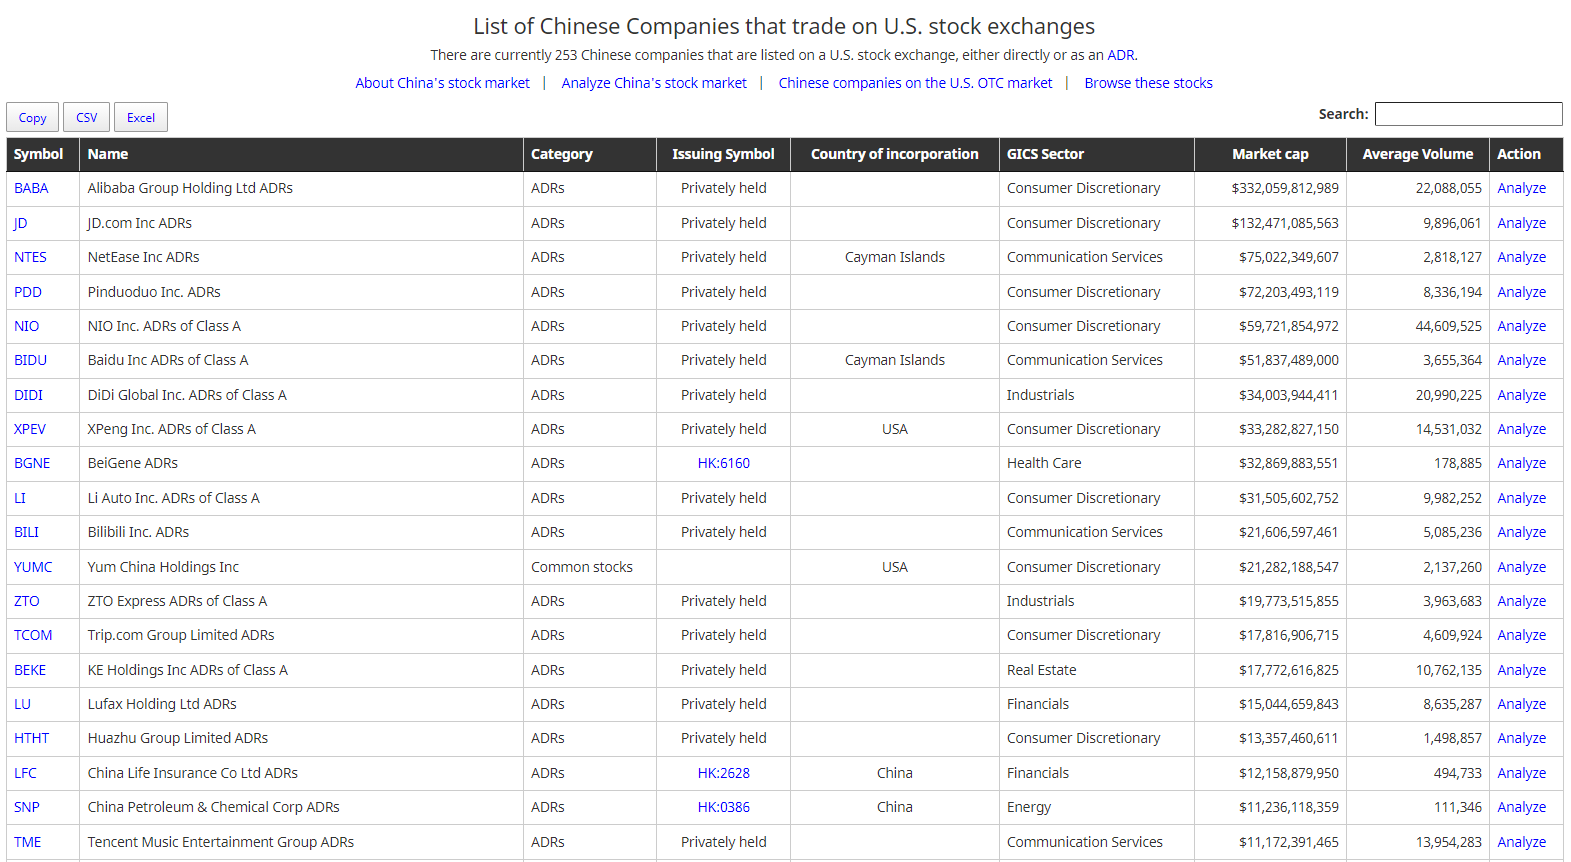 Tableau : list of chinese companies that trade on U.S. stock exchanges